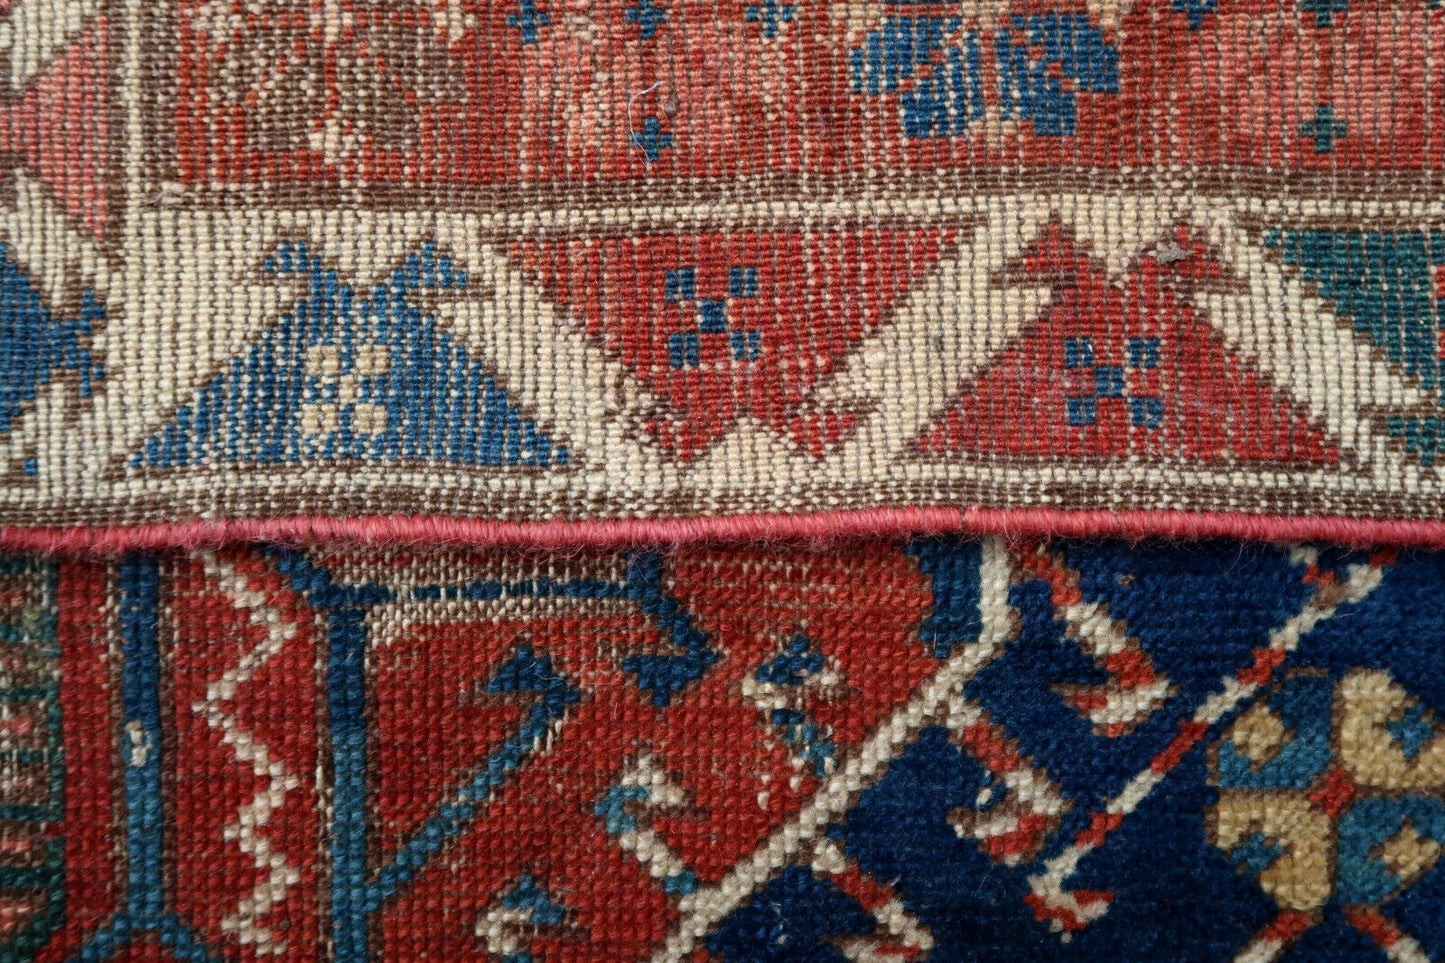 Handmade antique rug from Caucasian Shirvan region in blue and red colors. The rug has two different blues on the background. The rug is from the end of 19th century in distressed condition, it has some low pile and old restorations.